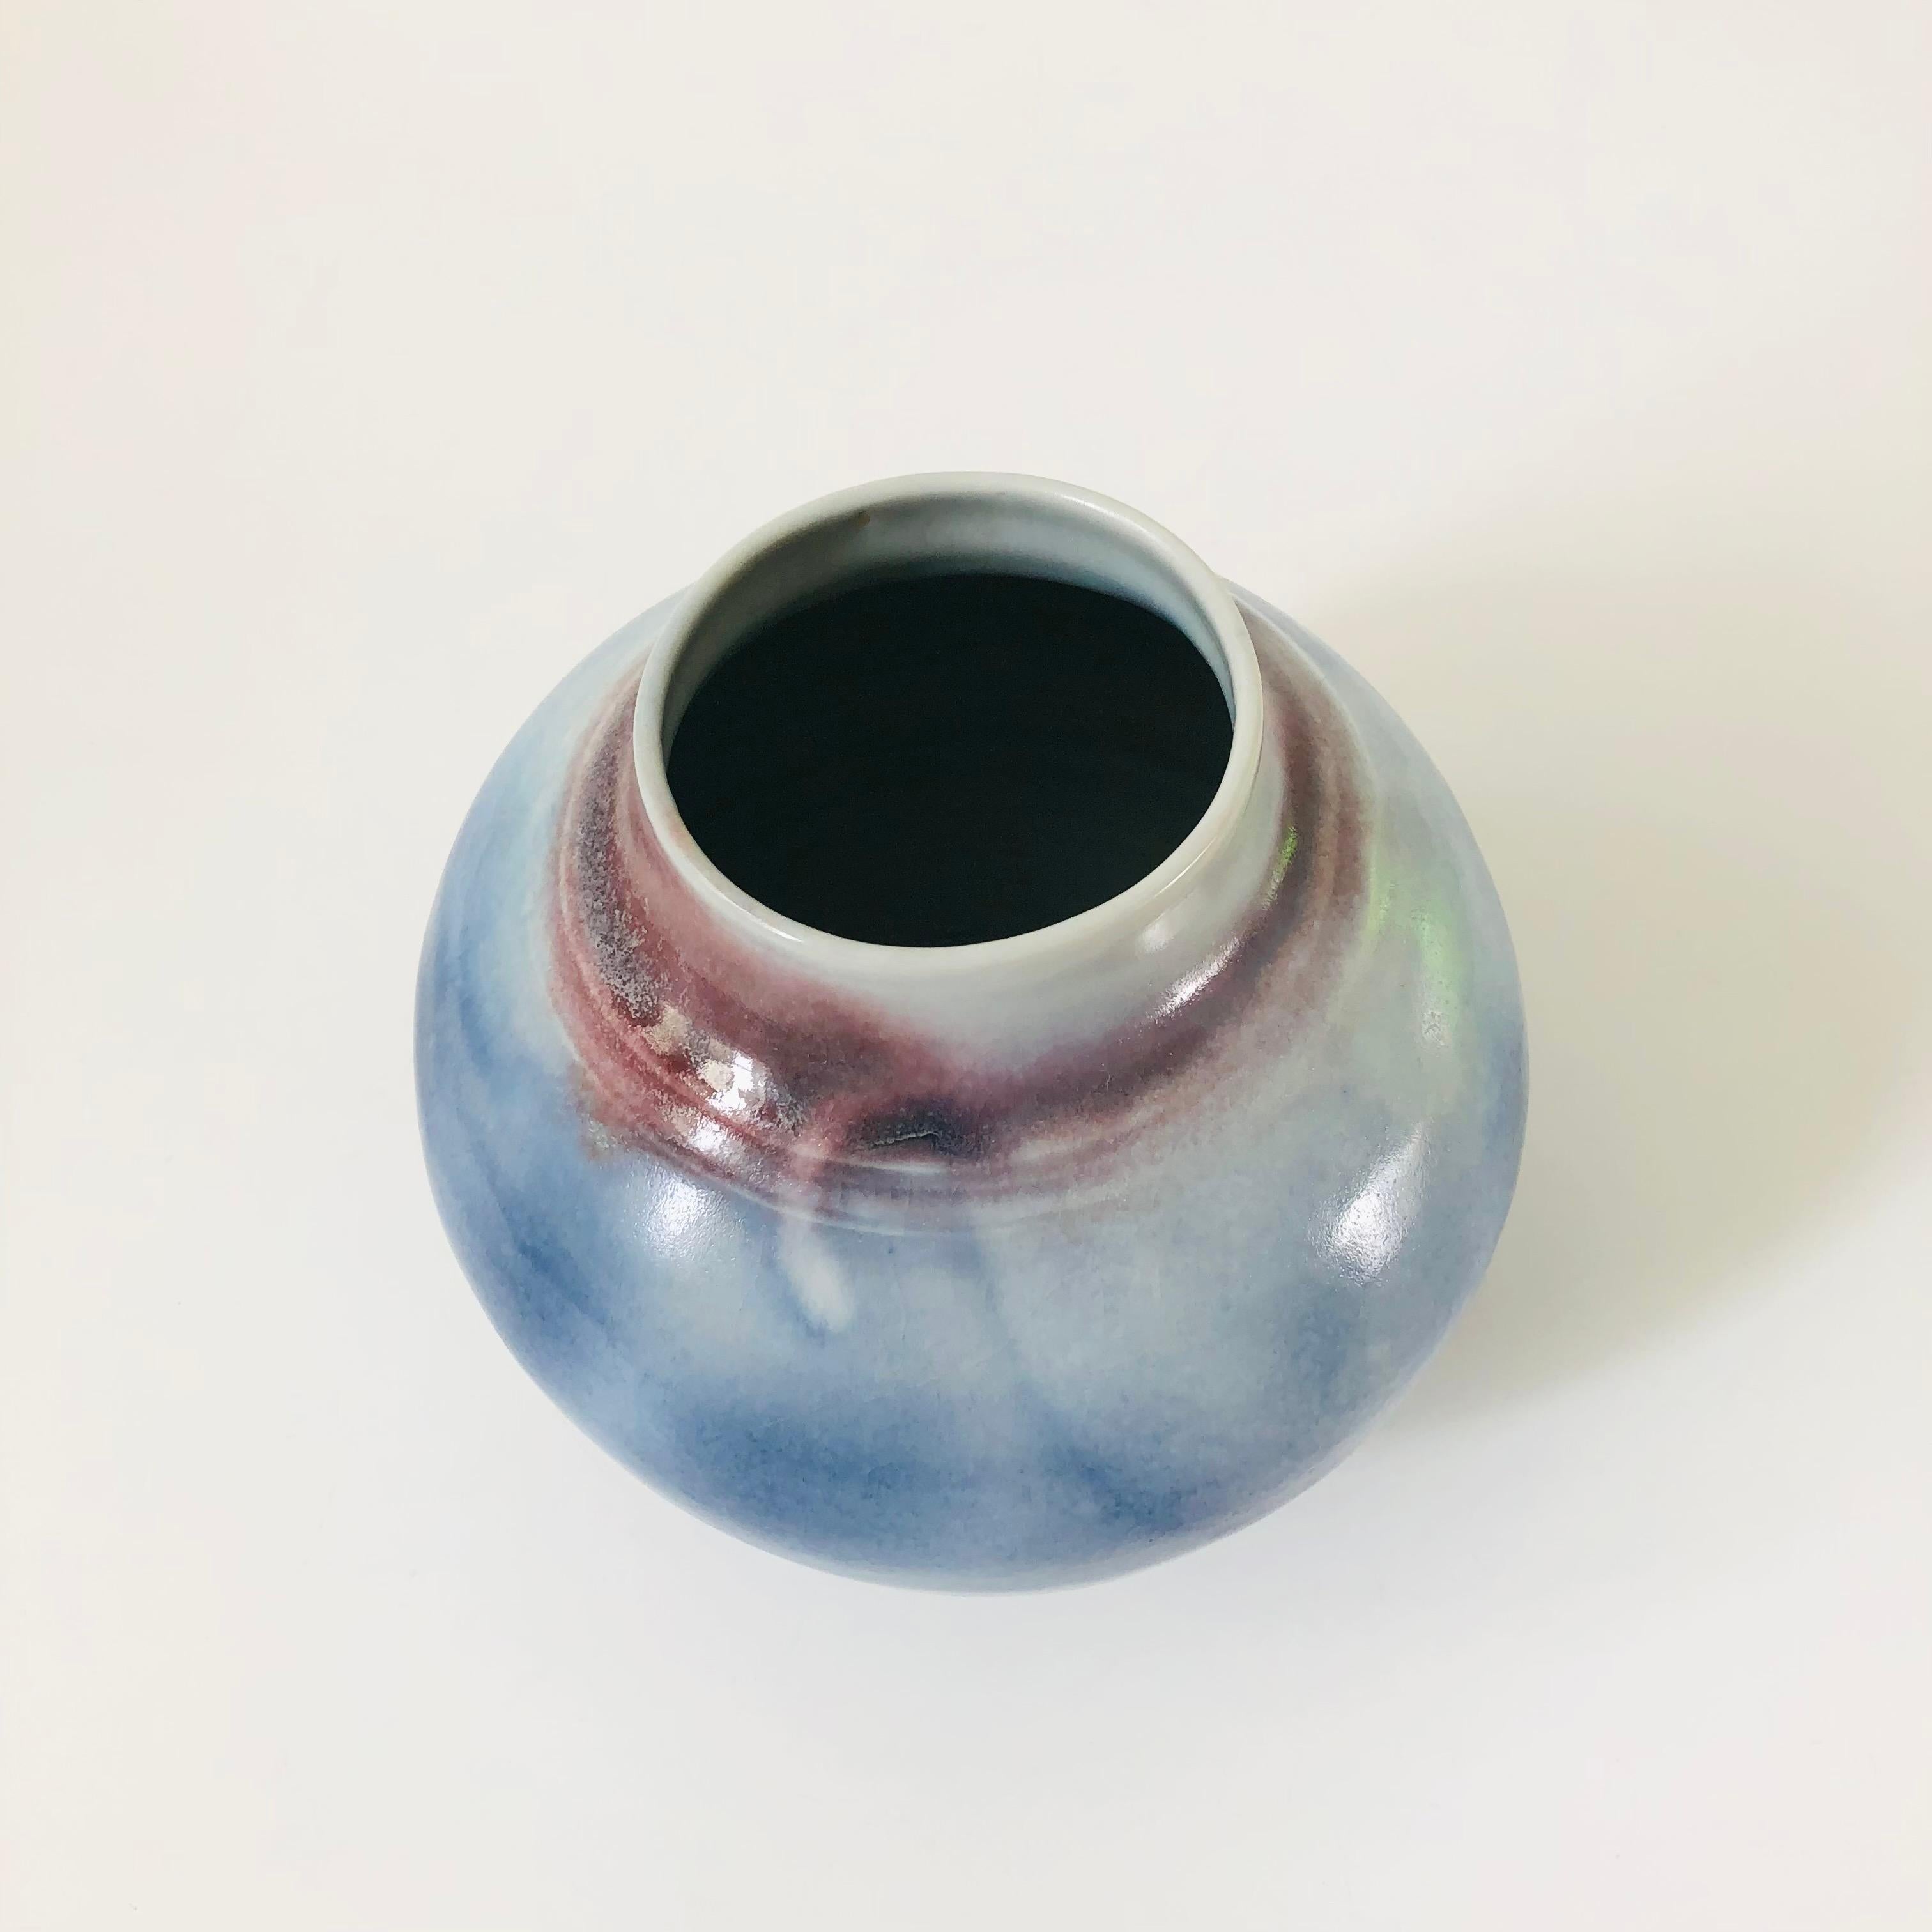 A vintage studio pottery vase. Beautiful variation in the blue and purple glazes. Nice round tapered shape. Signed 